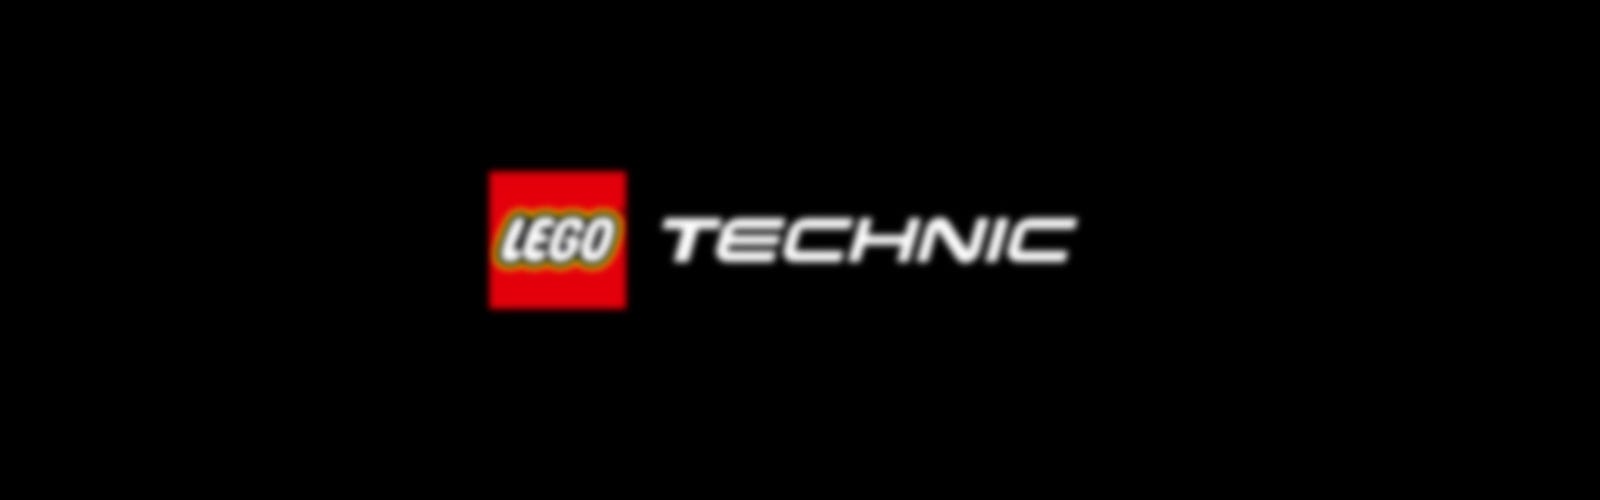 2022 Ford GT Lego Technic Debuts With 1,466 Pieces, Moving Pistons